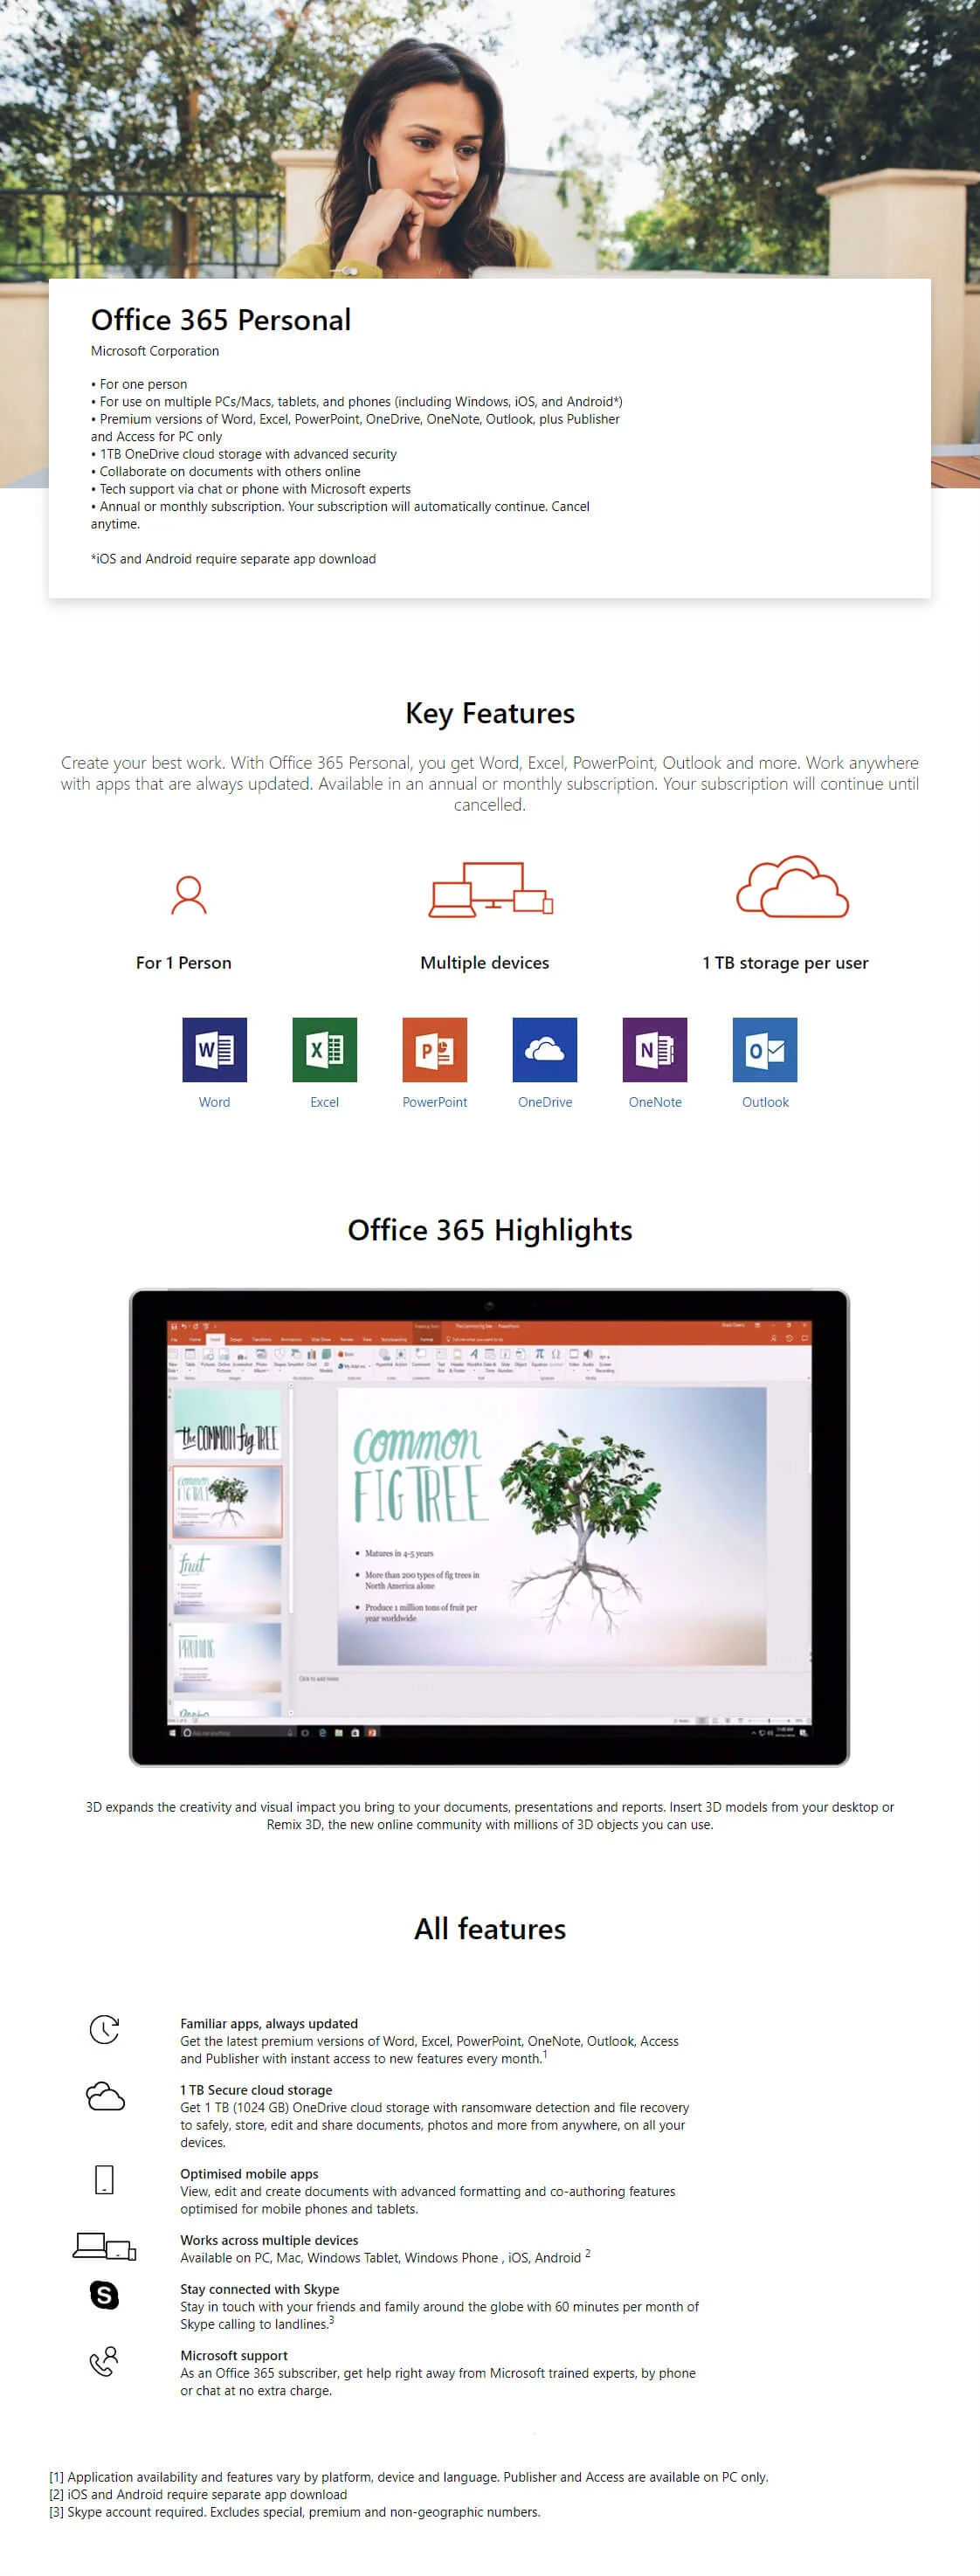 Microsoft Office 365 Personal Mac/Win(1 Year Subscription)